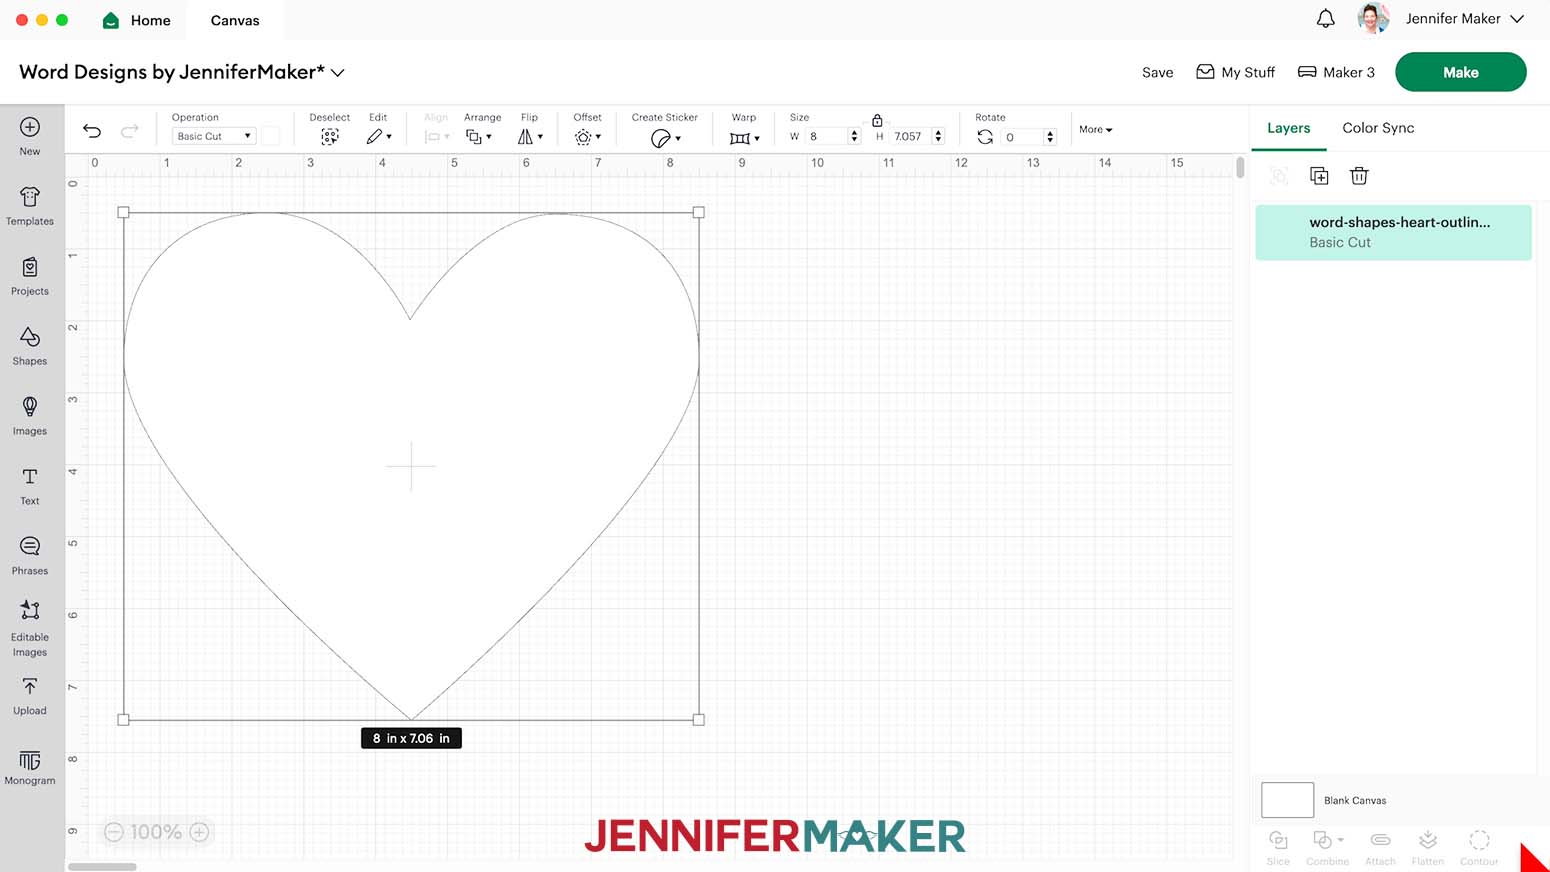 Fill Shapes blank heart svg uploaded to Cricut Design Space canvas showing dimensions.